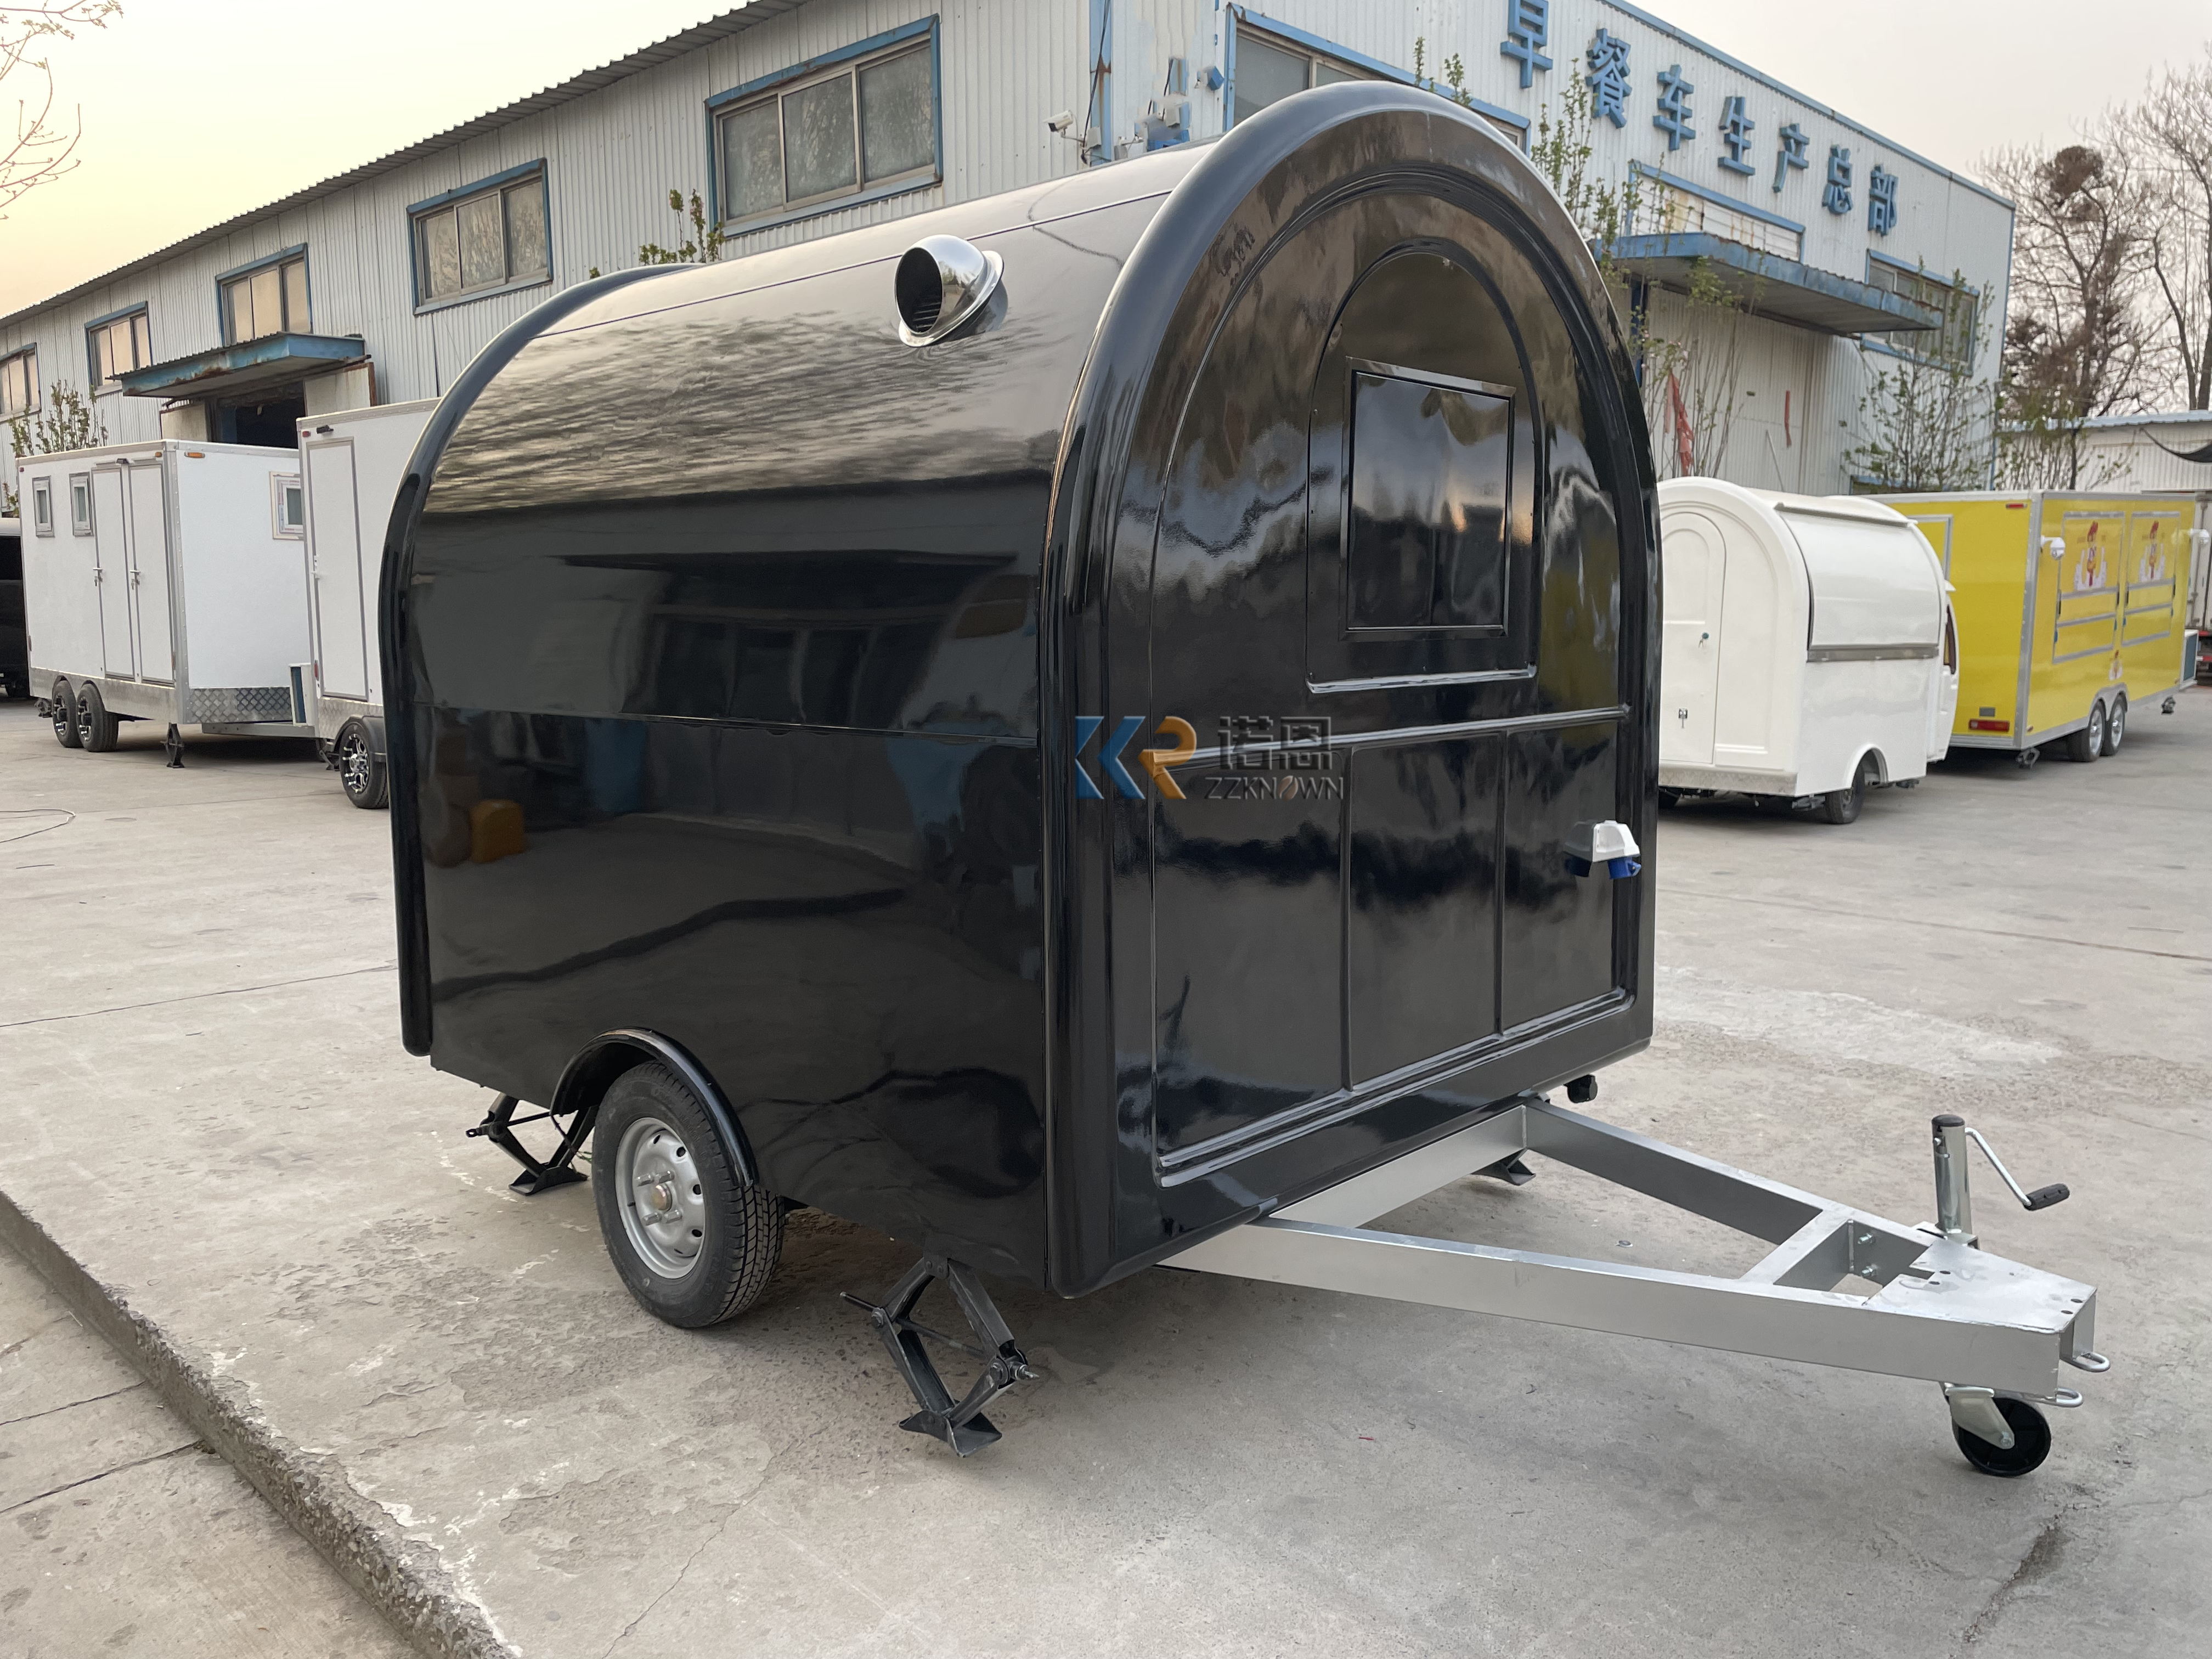 KN-FR-220W Hot Sale Food Trailers Coffee Trailers Fully Equipped Food Truck Trailers